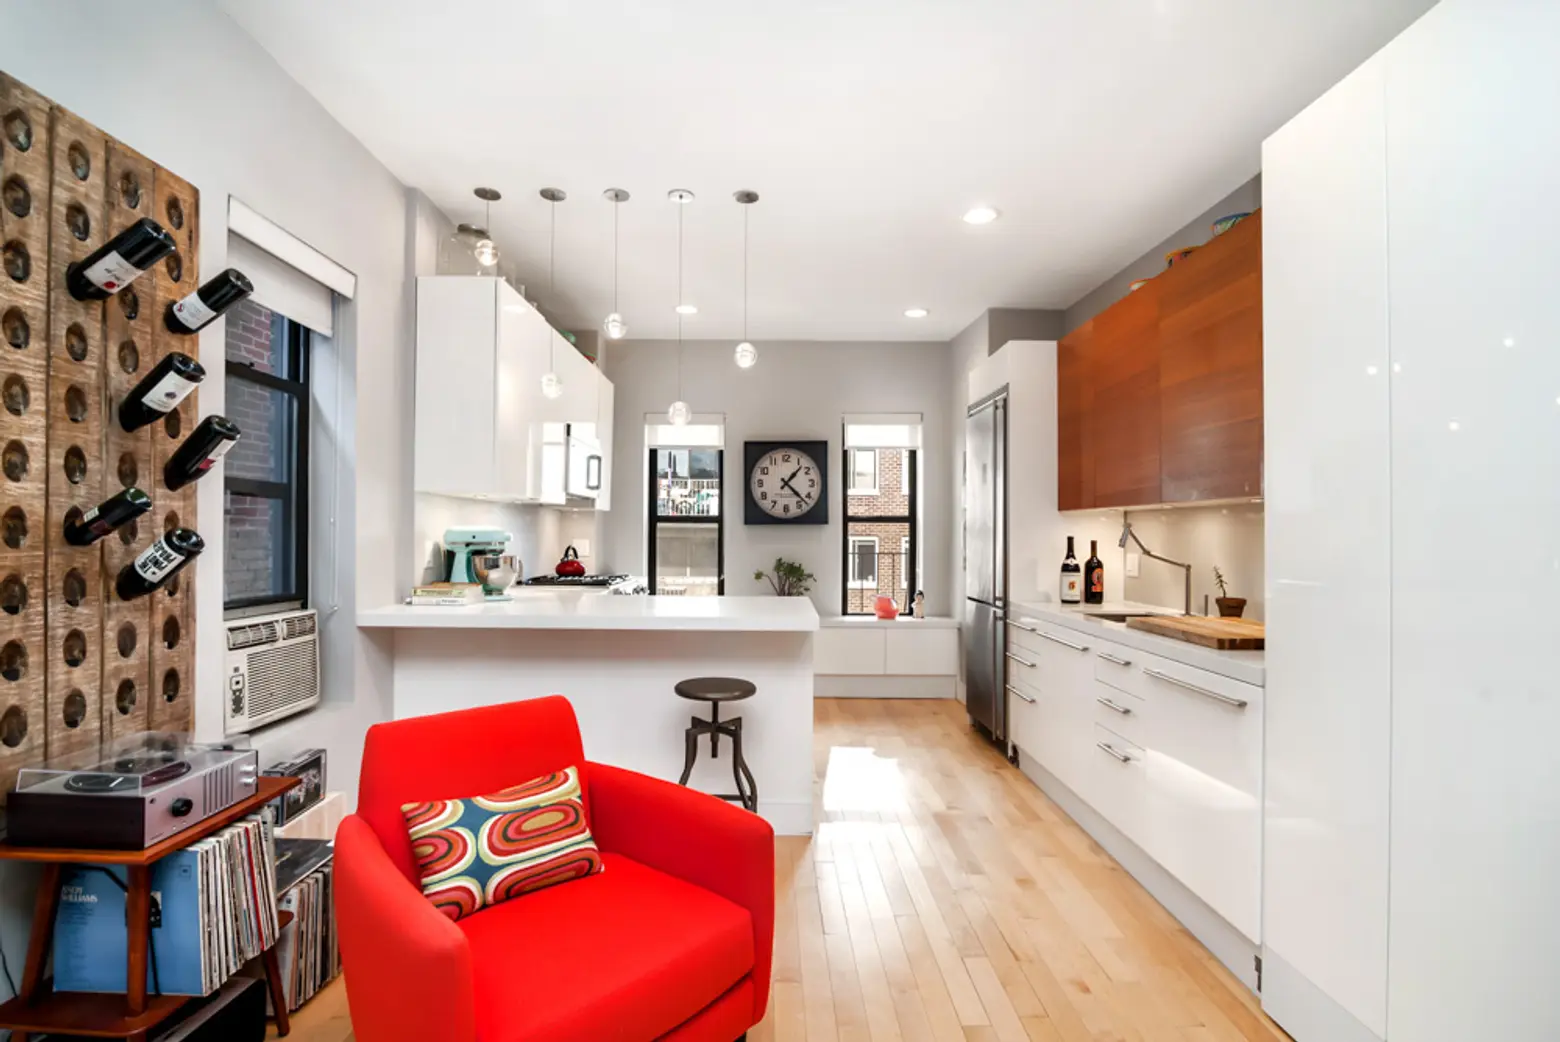 $985K Renovated UWS Co-op Checks a Lot of Boxes; Just Hope You Don’t Have to Carry Them